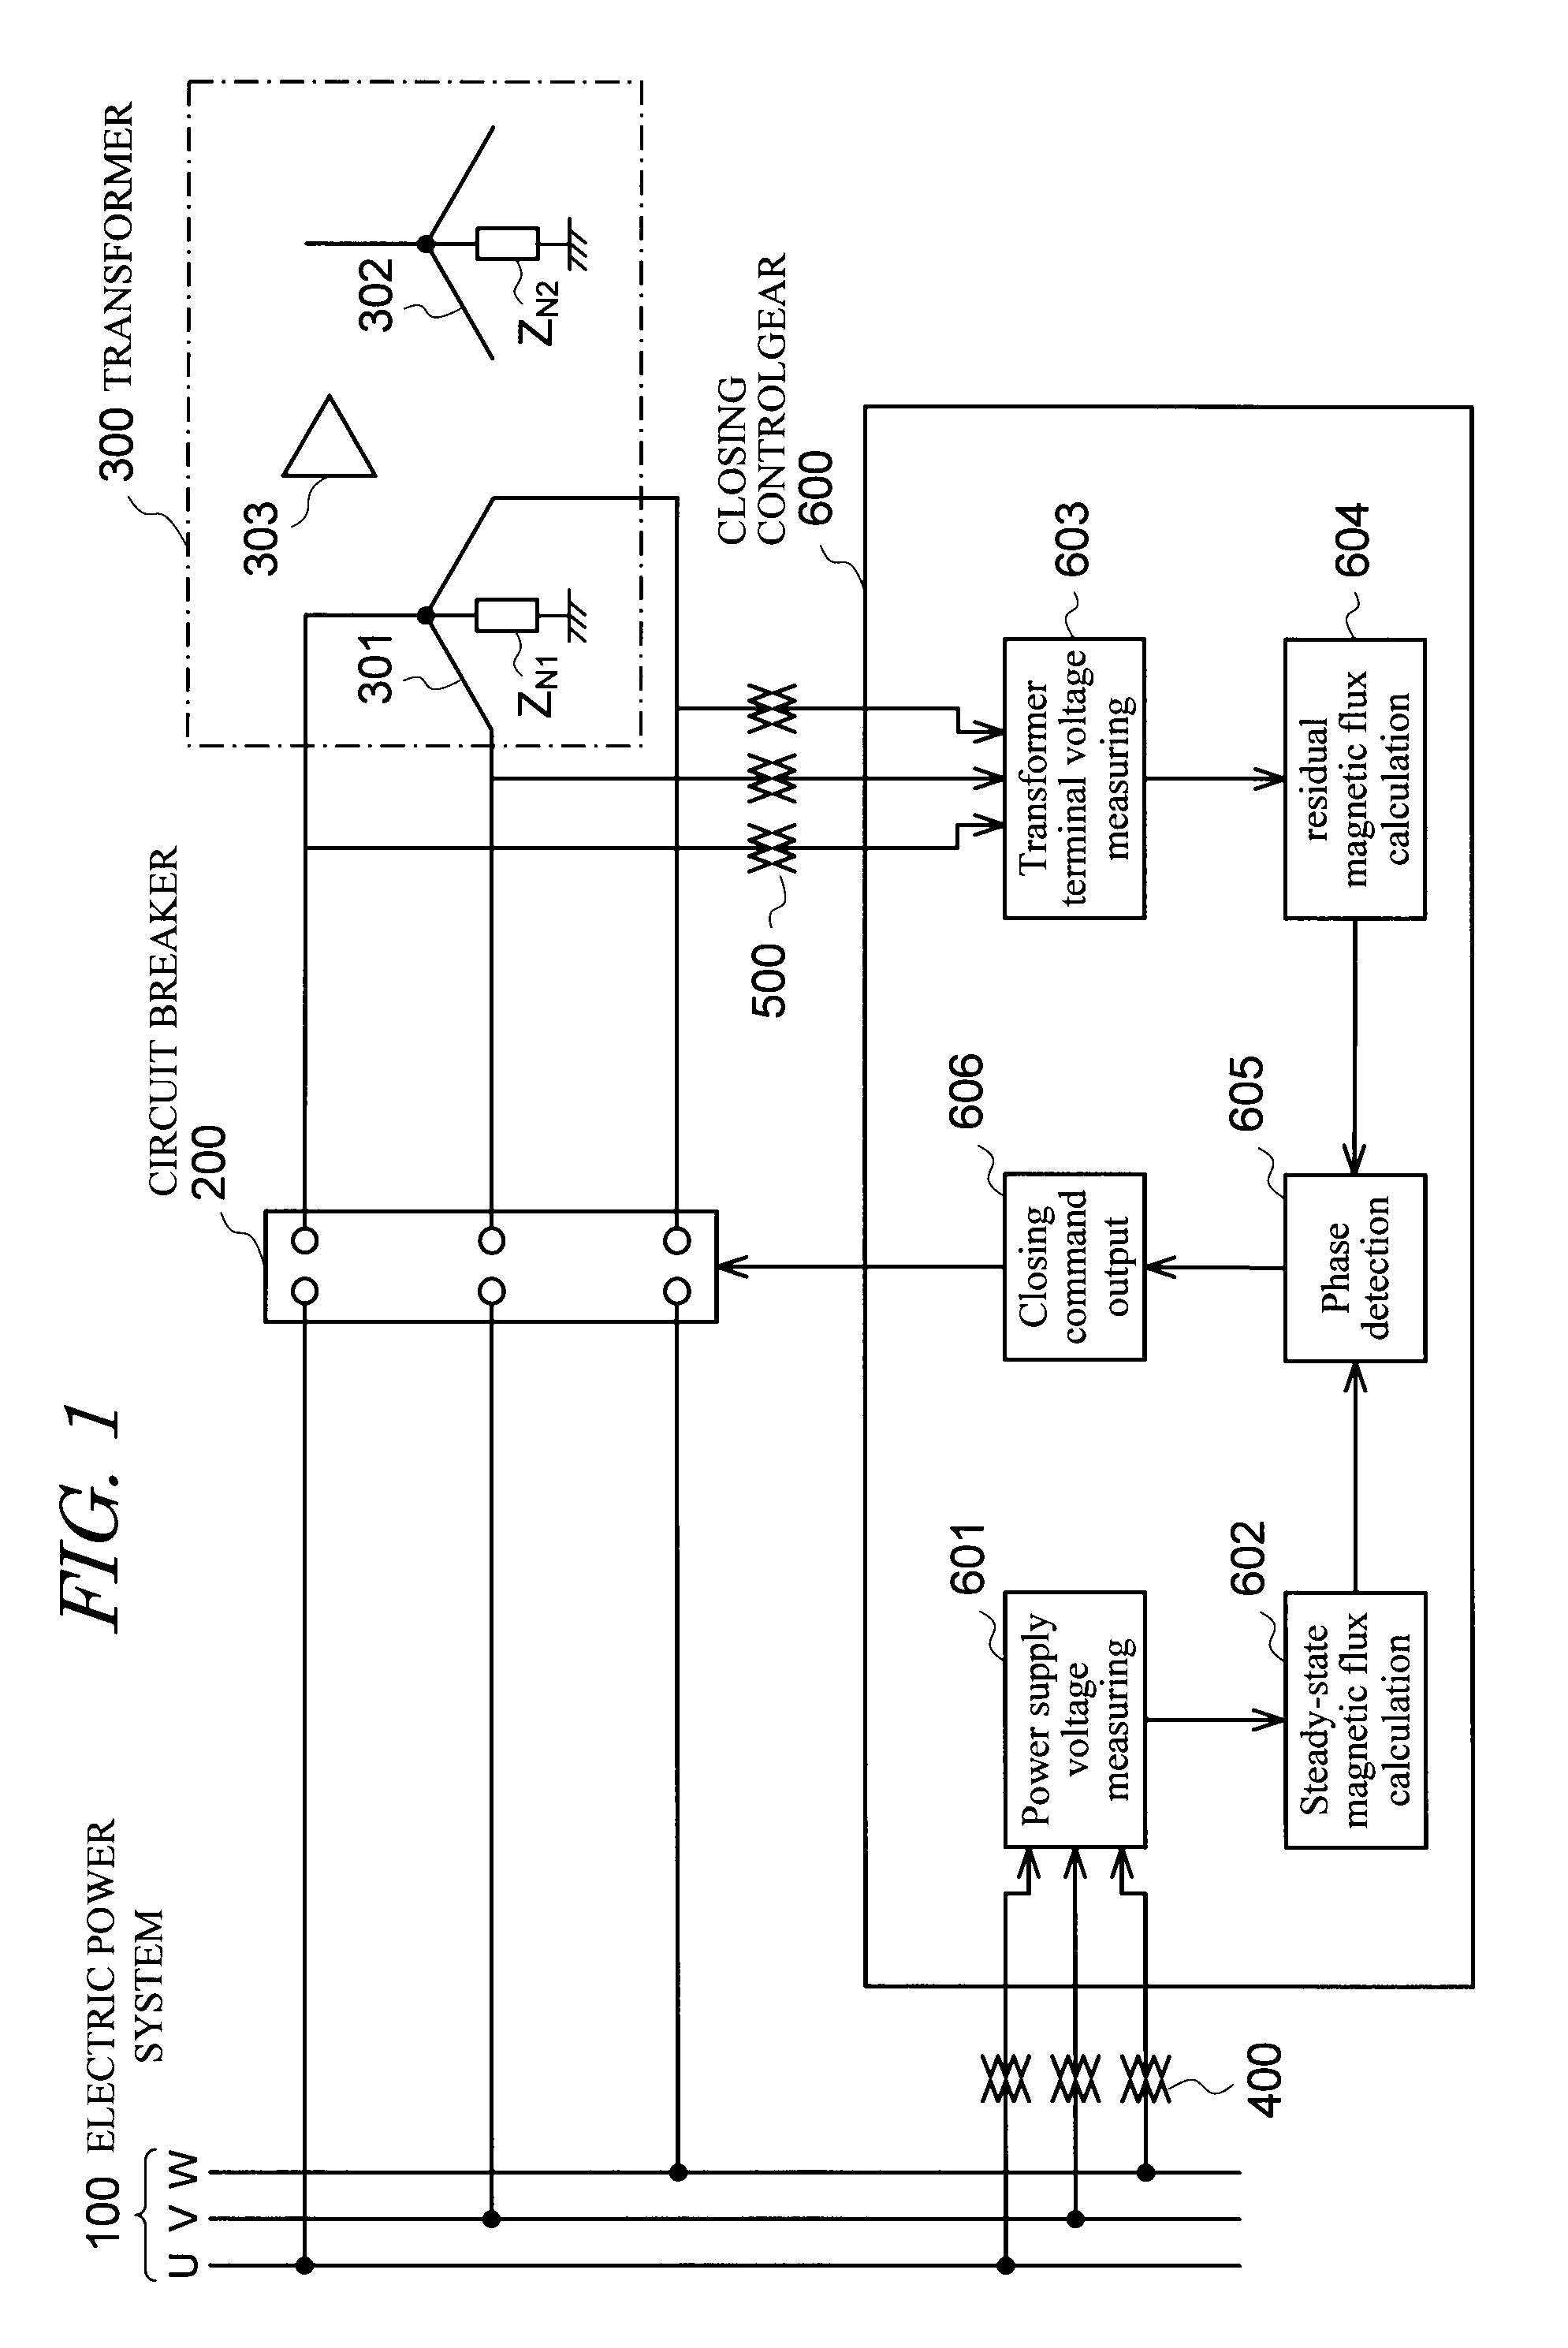 Magnetizing inrush current suppression device and method for transformer